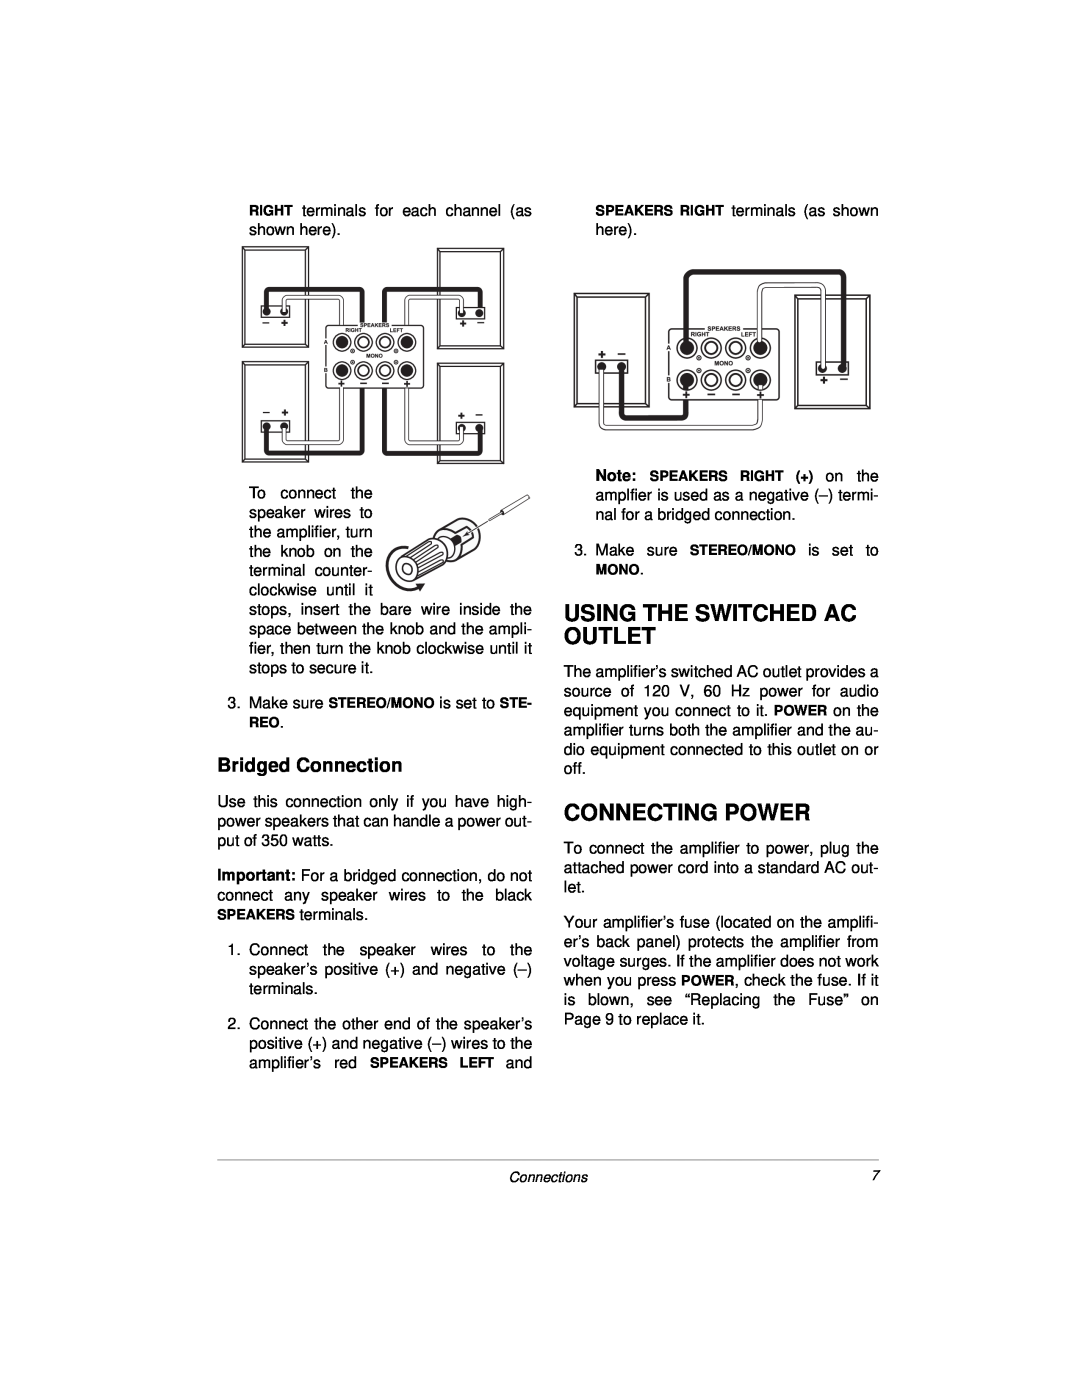 Radio Shack 32-2004, 04A00 owner manual Using The Switched Ac Outlet, Connecting Power, Bridged Connection 